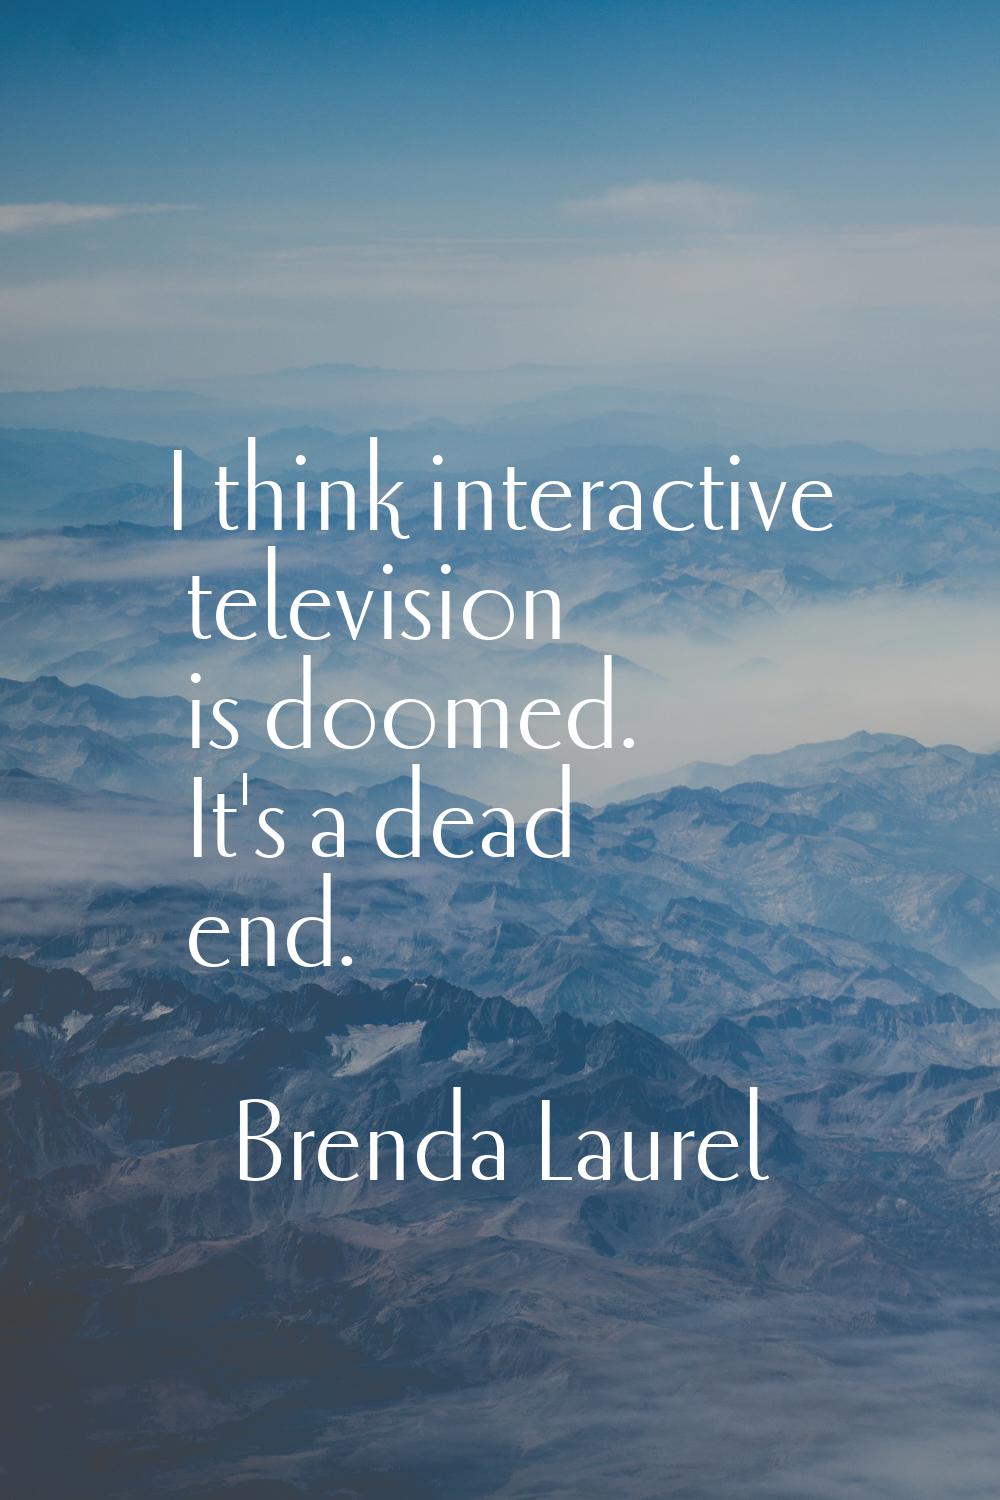 I think interactive television is doomed. It's a dead end.